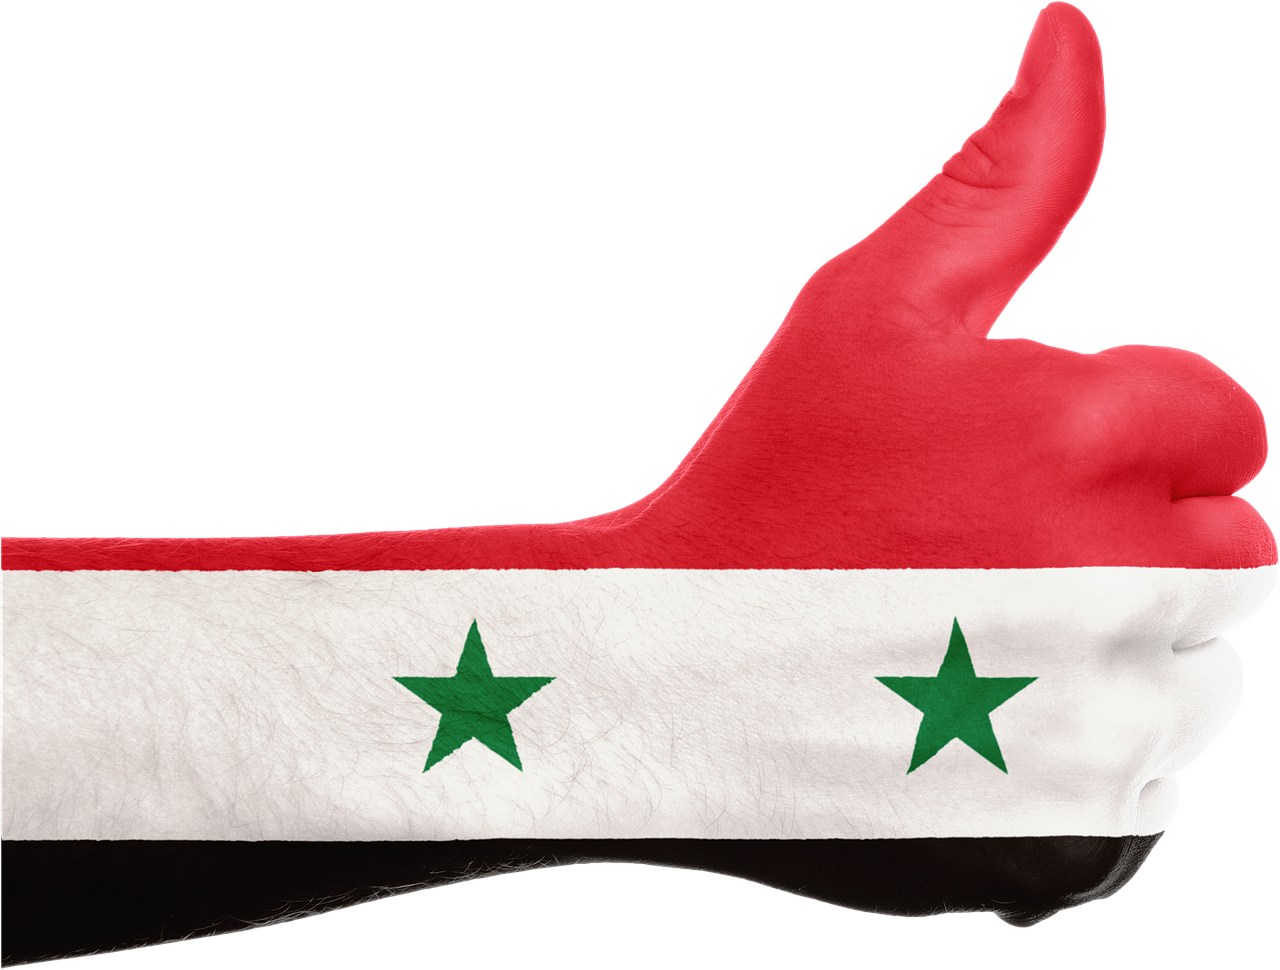 Syria Flag Thumbs Up Gesture PNG image